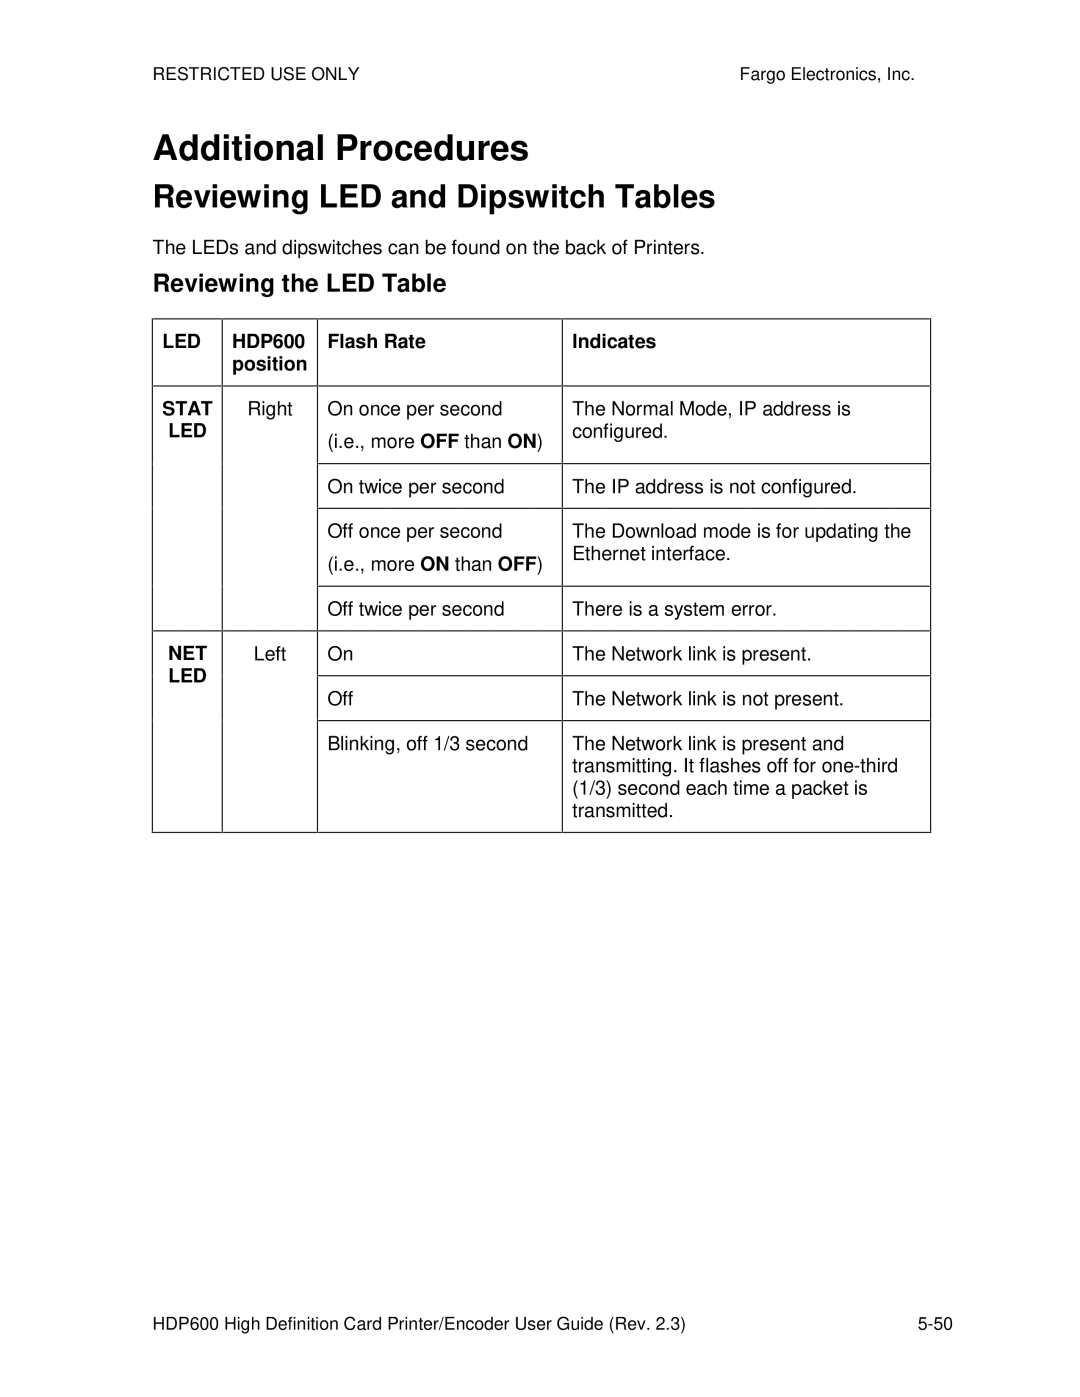 FARGO electronic HDP600 CR100, HDP600-LC manual Reviewing LED and Dipswitch Tables, Reviewing the LED Table 